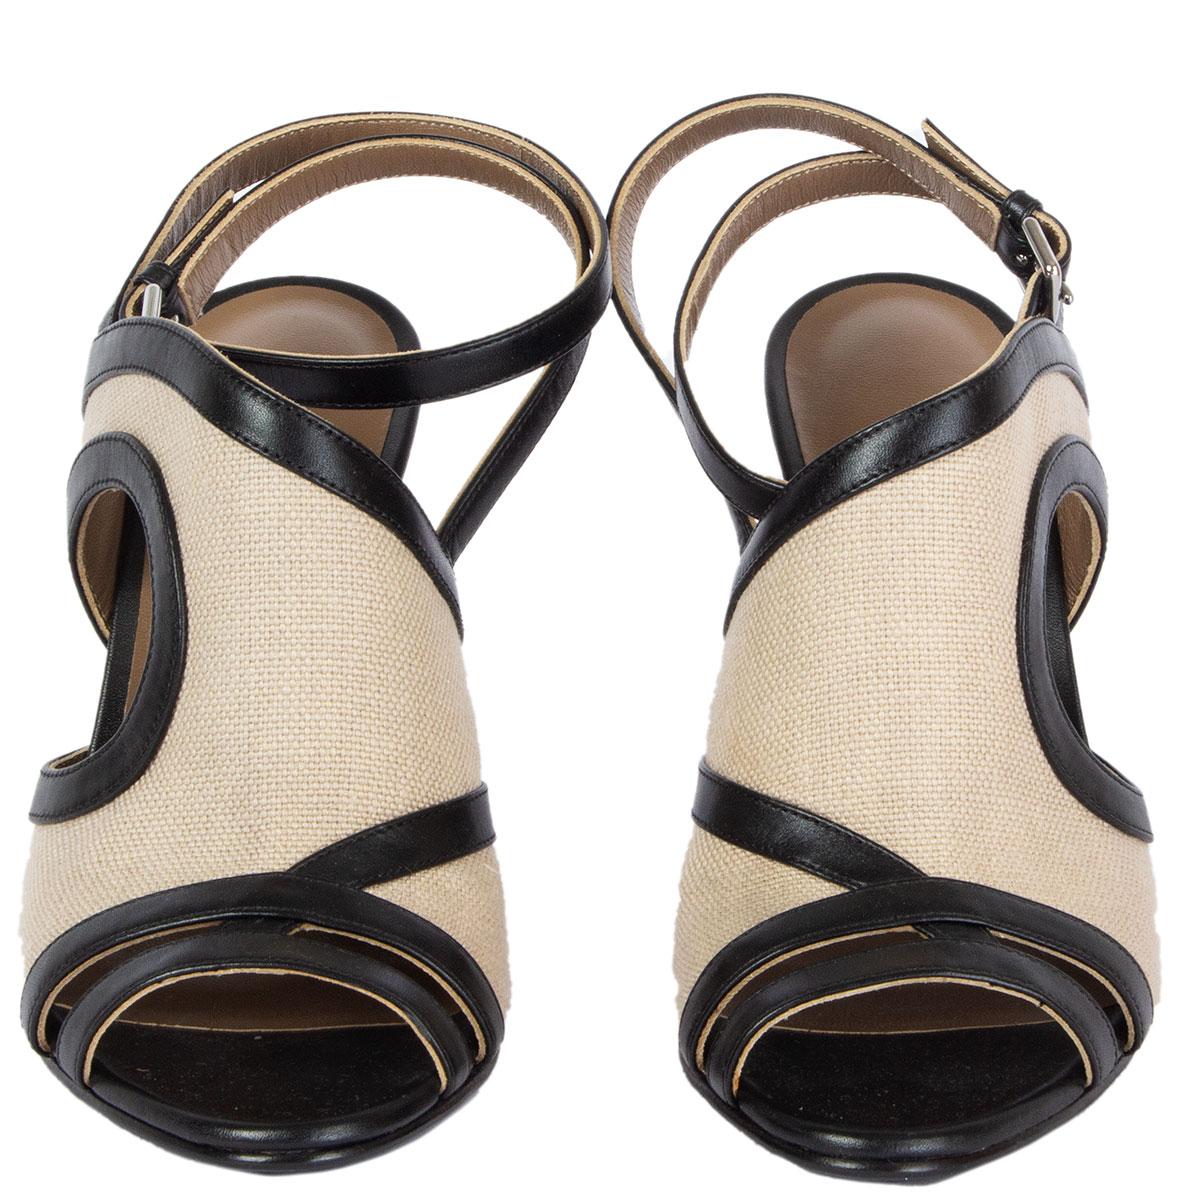 100% authentic Hermes Rafaella ankle-strap sandals in taupe canvas featuring black leather trimming and heel. Brand new. Come with dust bag. 

Measurements
Imprinted Size	38
Shoe Size	38
Inside Sole	24.5cm (9.6in)
Width	7.5cm (2.9in)
Heel	11cm